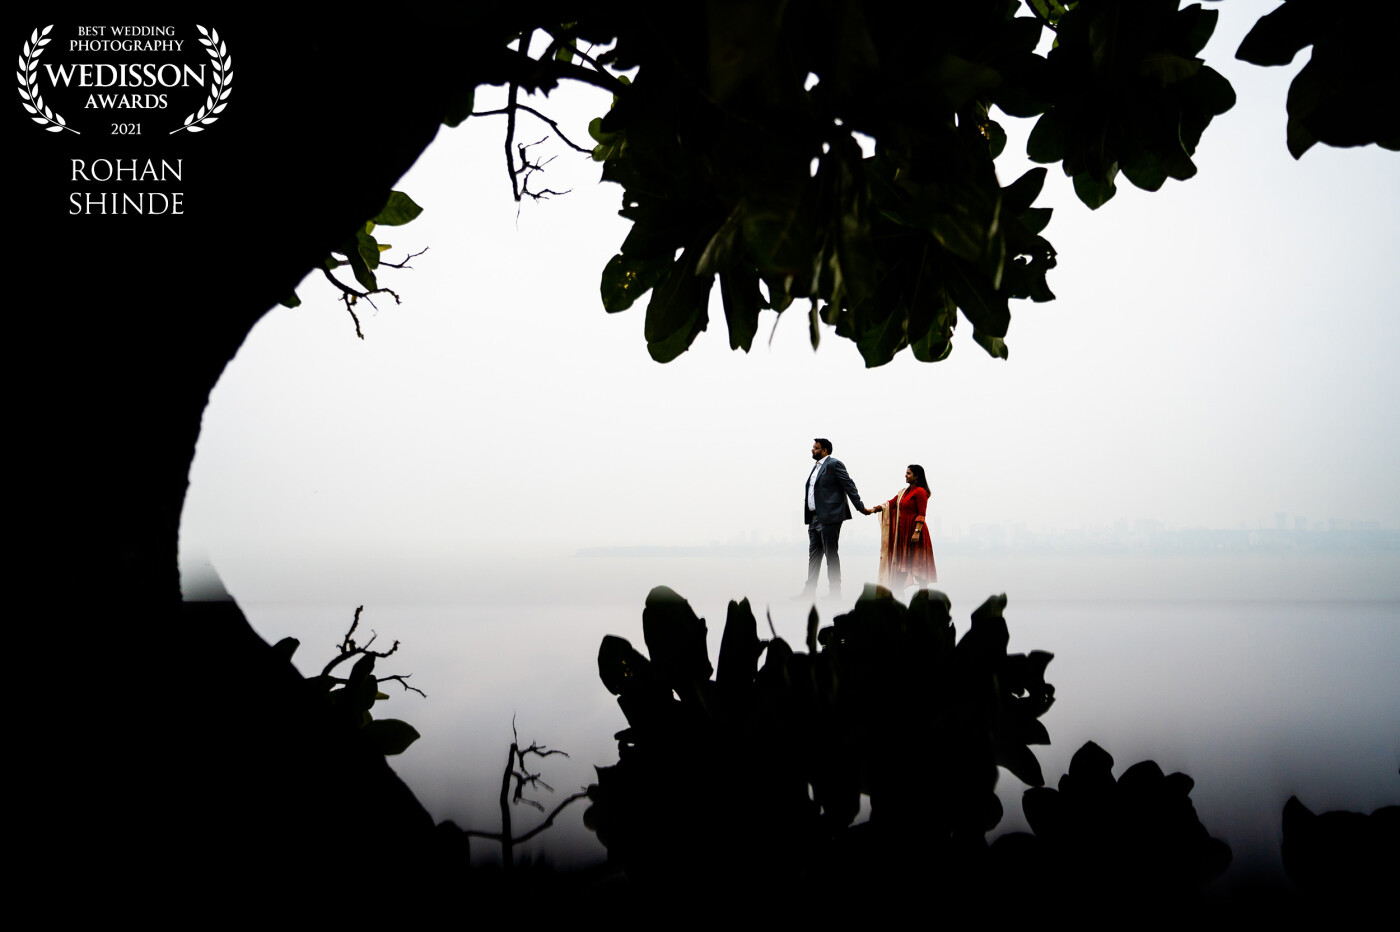 Shot this beautiful image at Marine Drive, Mumbai. It was an early morning shot. Quite Mumbai is rear. Covid-19 was out of our minds. Wonderful weather, and a couple in love about to spend rest their of lives together.